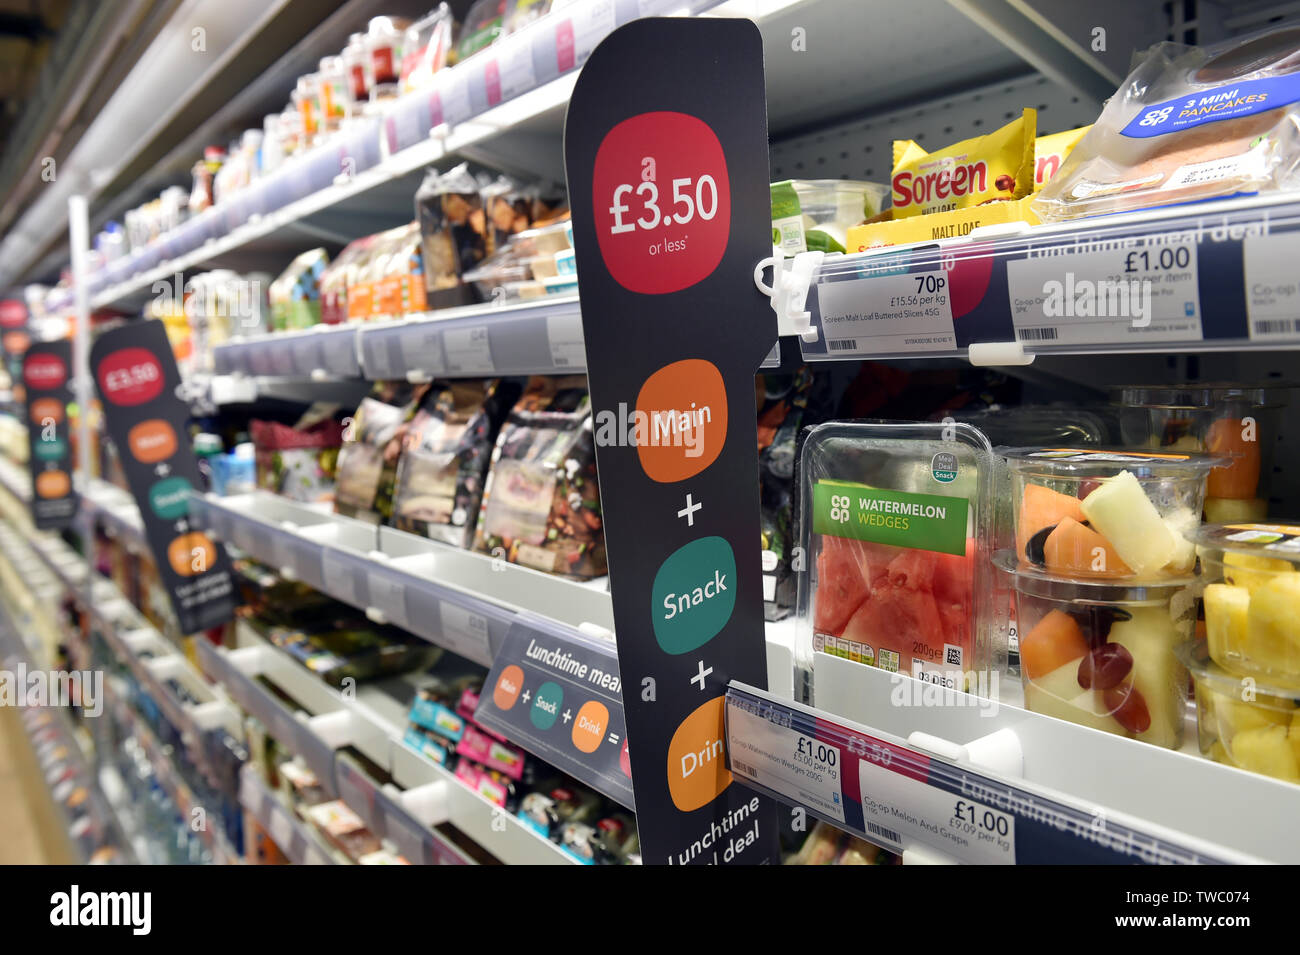 Meal deal in a supermarket main, snack and drink for £3.50 UK Stock Photo